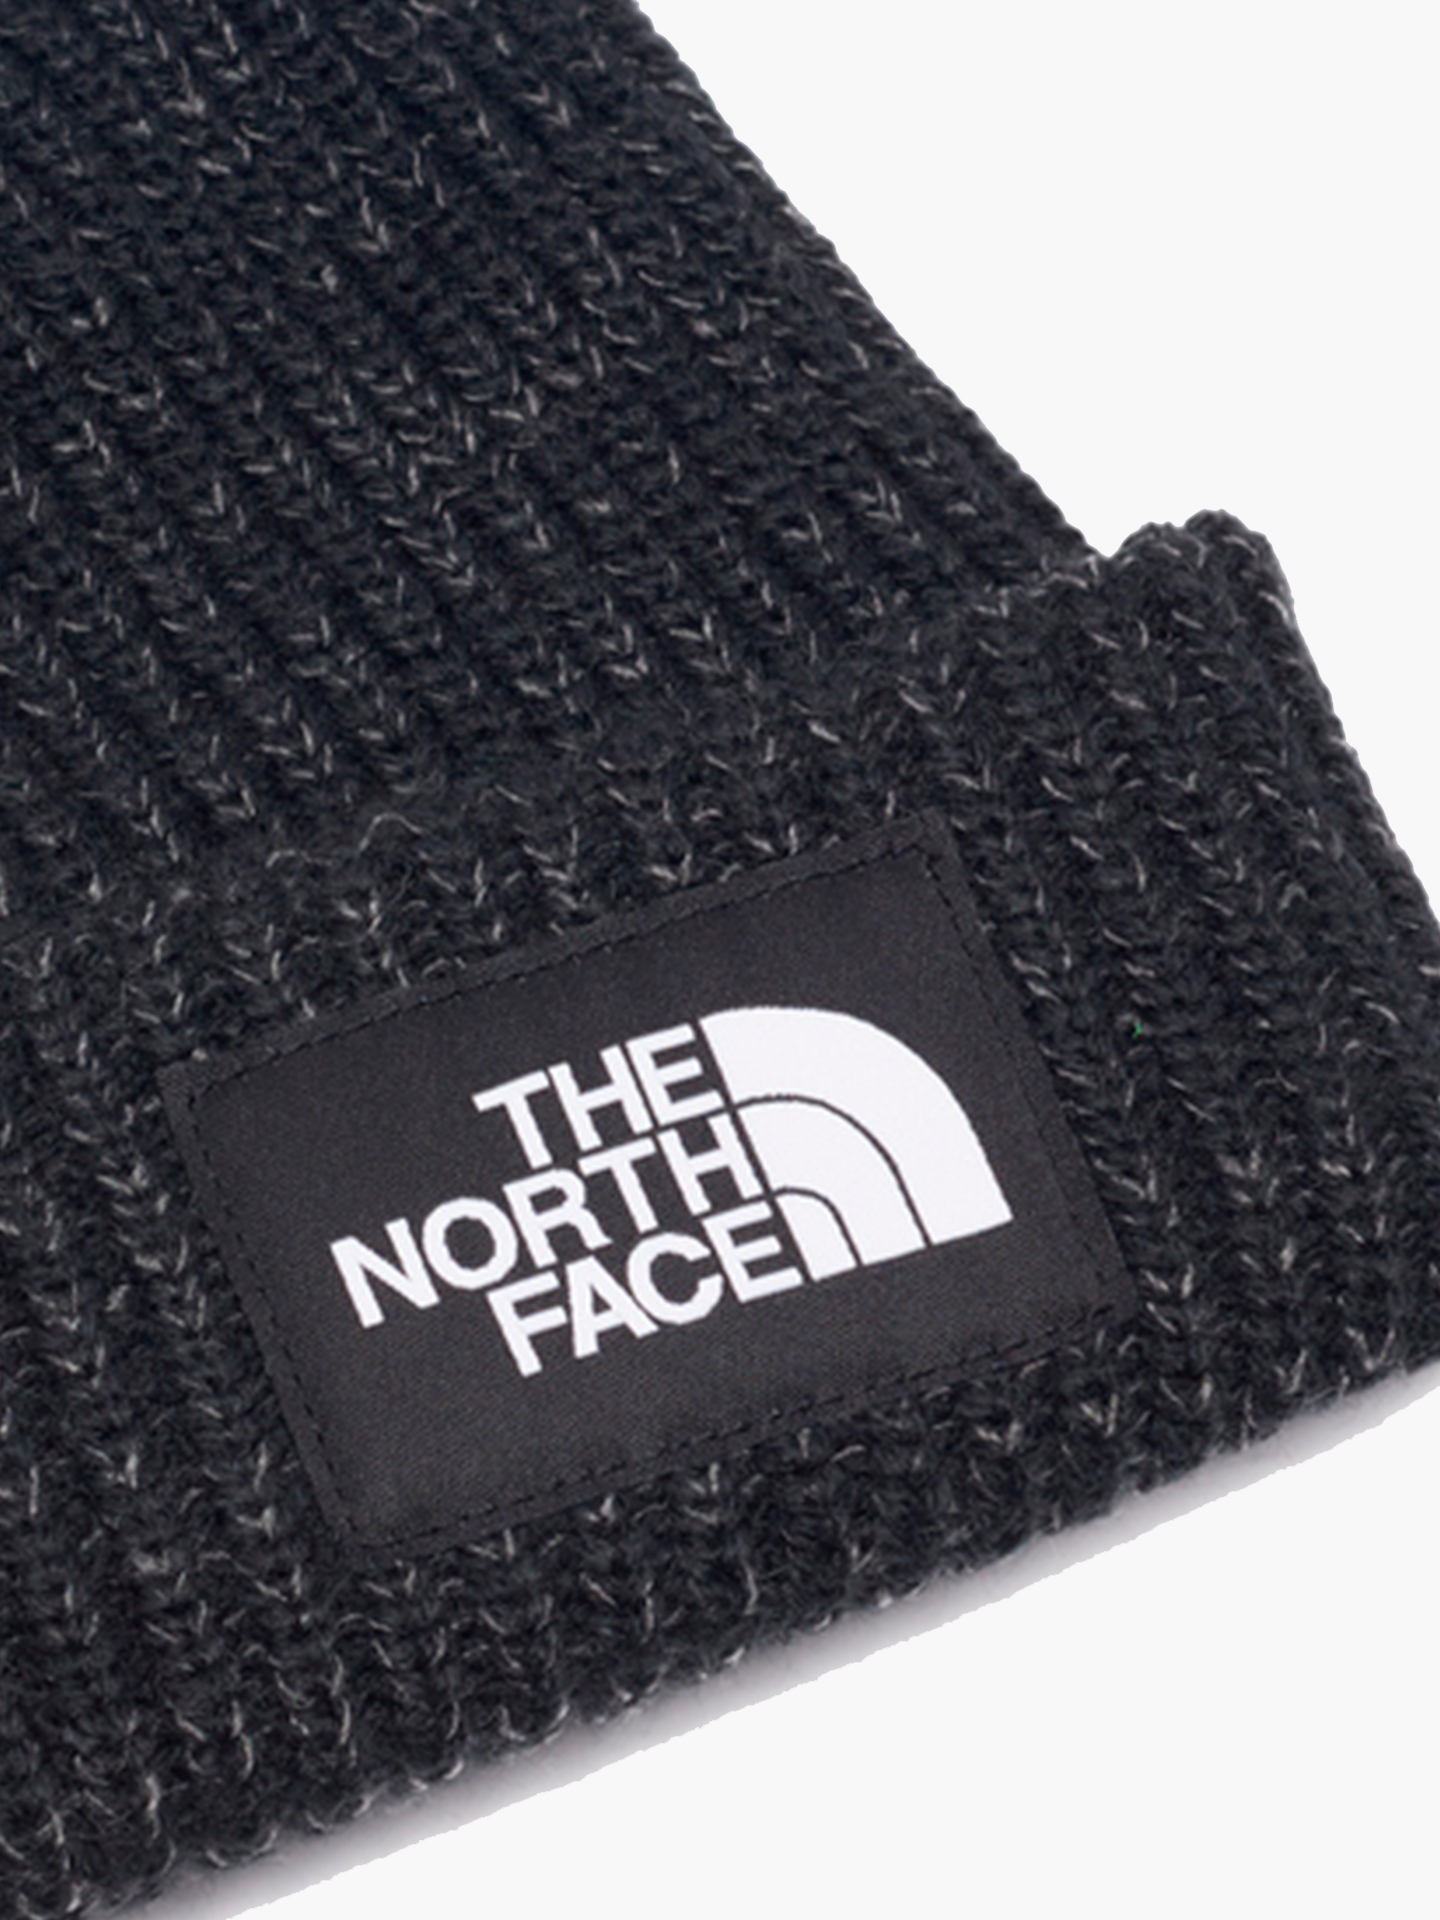 T93FJWJK3 Шапка The North Face Salty Dog Beanie Black, OS T93FJWJK3 - фото 2